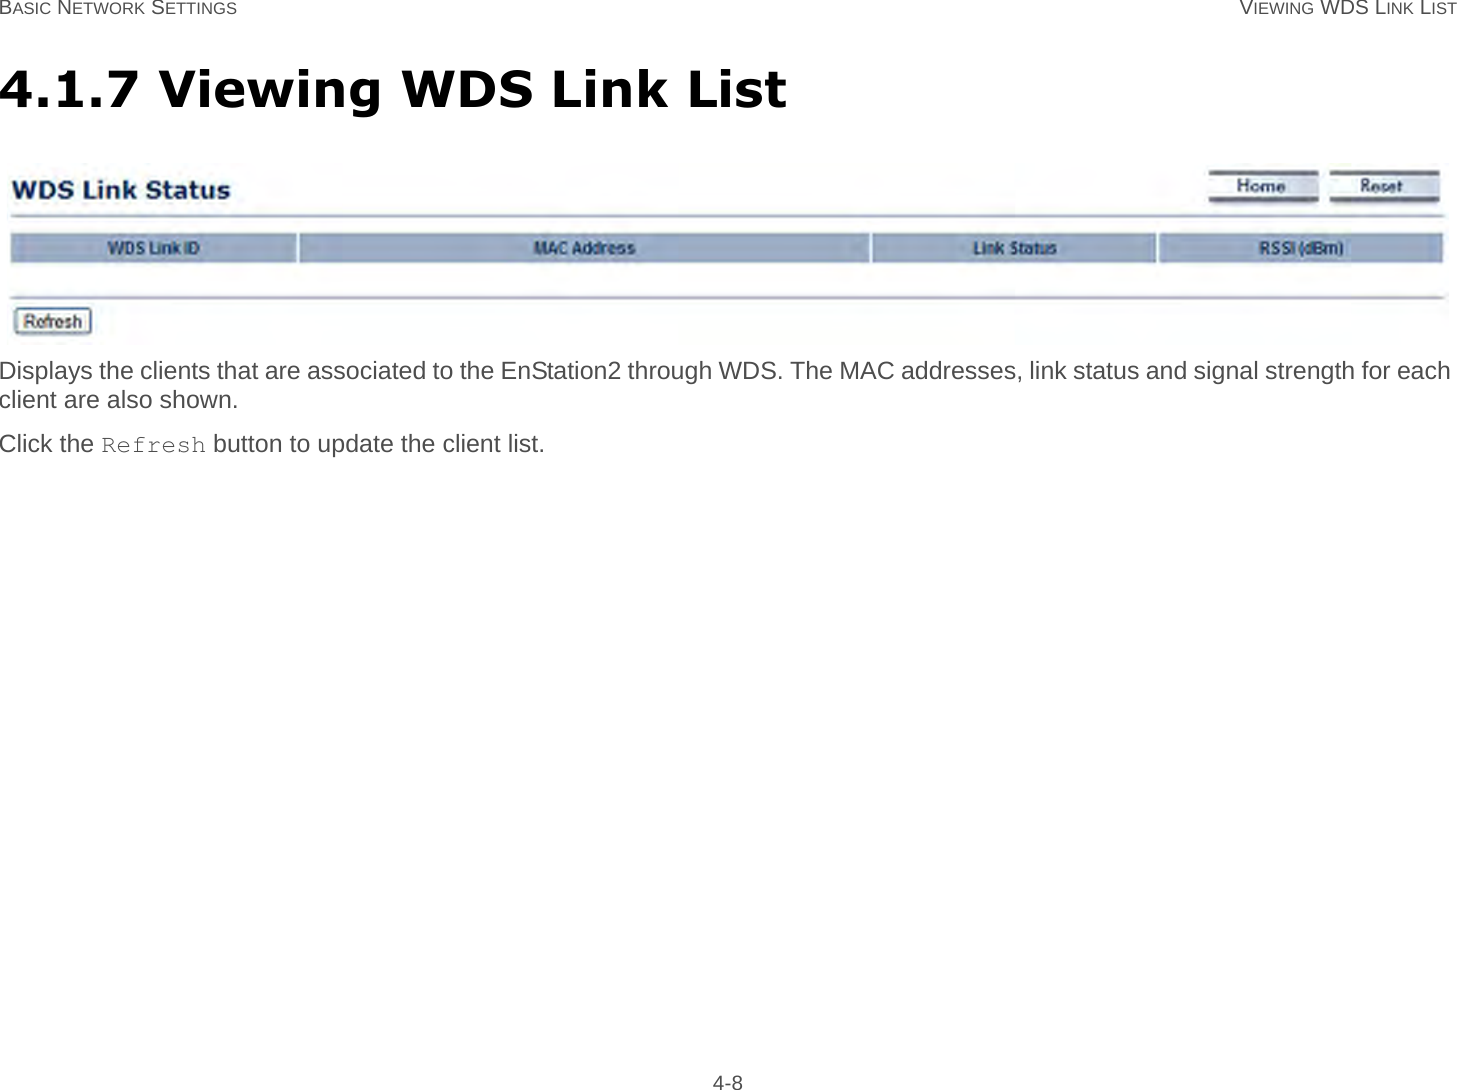 BASIC NETWORK SETTINGS VIEWING WDS LINK LIST 4-84.1.7 Viewing WDS Link ListDisplays the clients that are associated to the EnStation2 through WDS. The MAC addresses, link status and signal strength for each client are also shown.Click the Refresh button to update the client list.